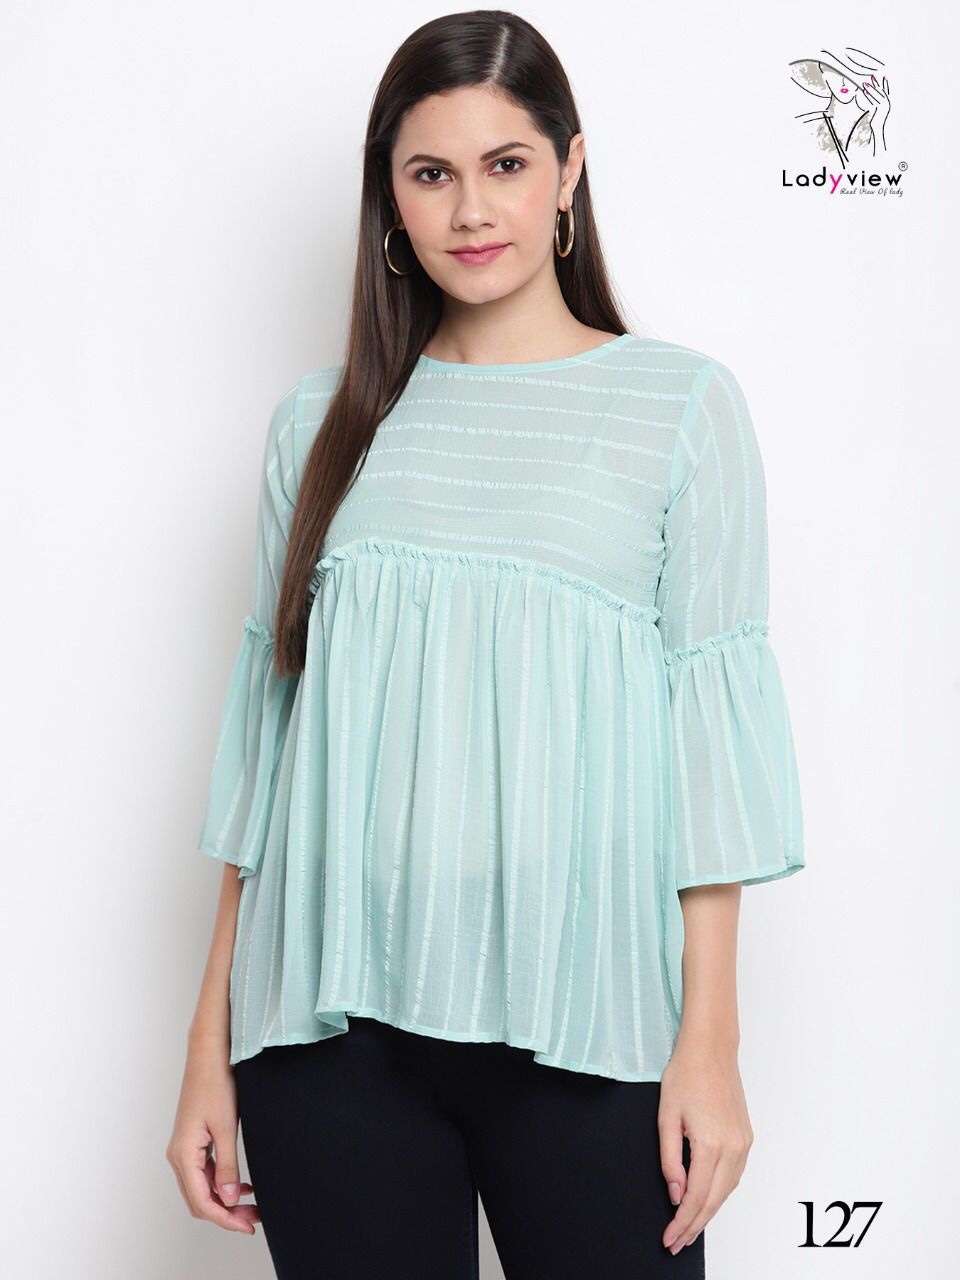 Ladyview westo vol 1 georgette readymade western tops at Wholesale Rate 